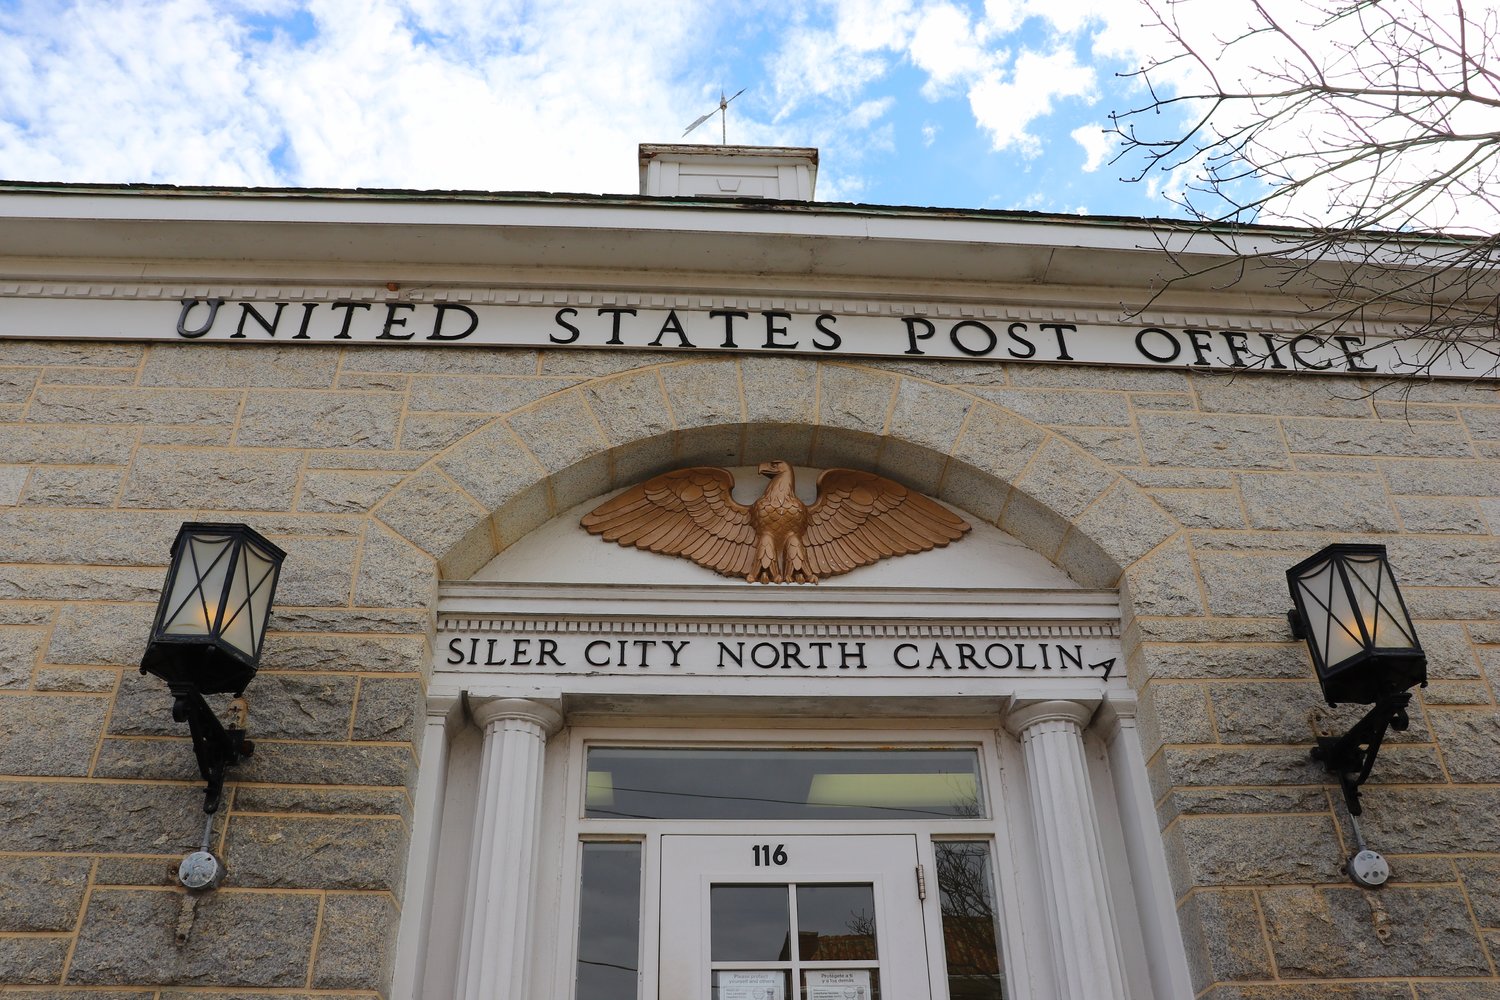 U.S. Postal Service officials would not confirm, but sources — including employees of the Siler City office — say 75% of staff have tested positive with COVID-19.